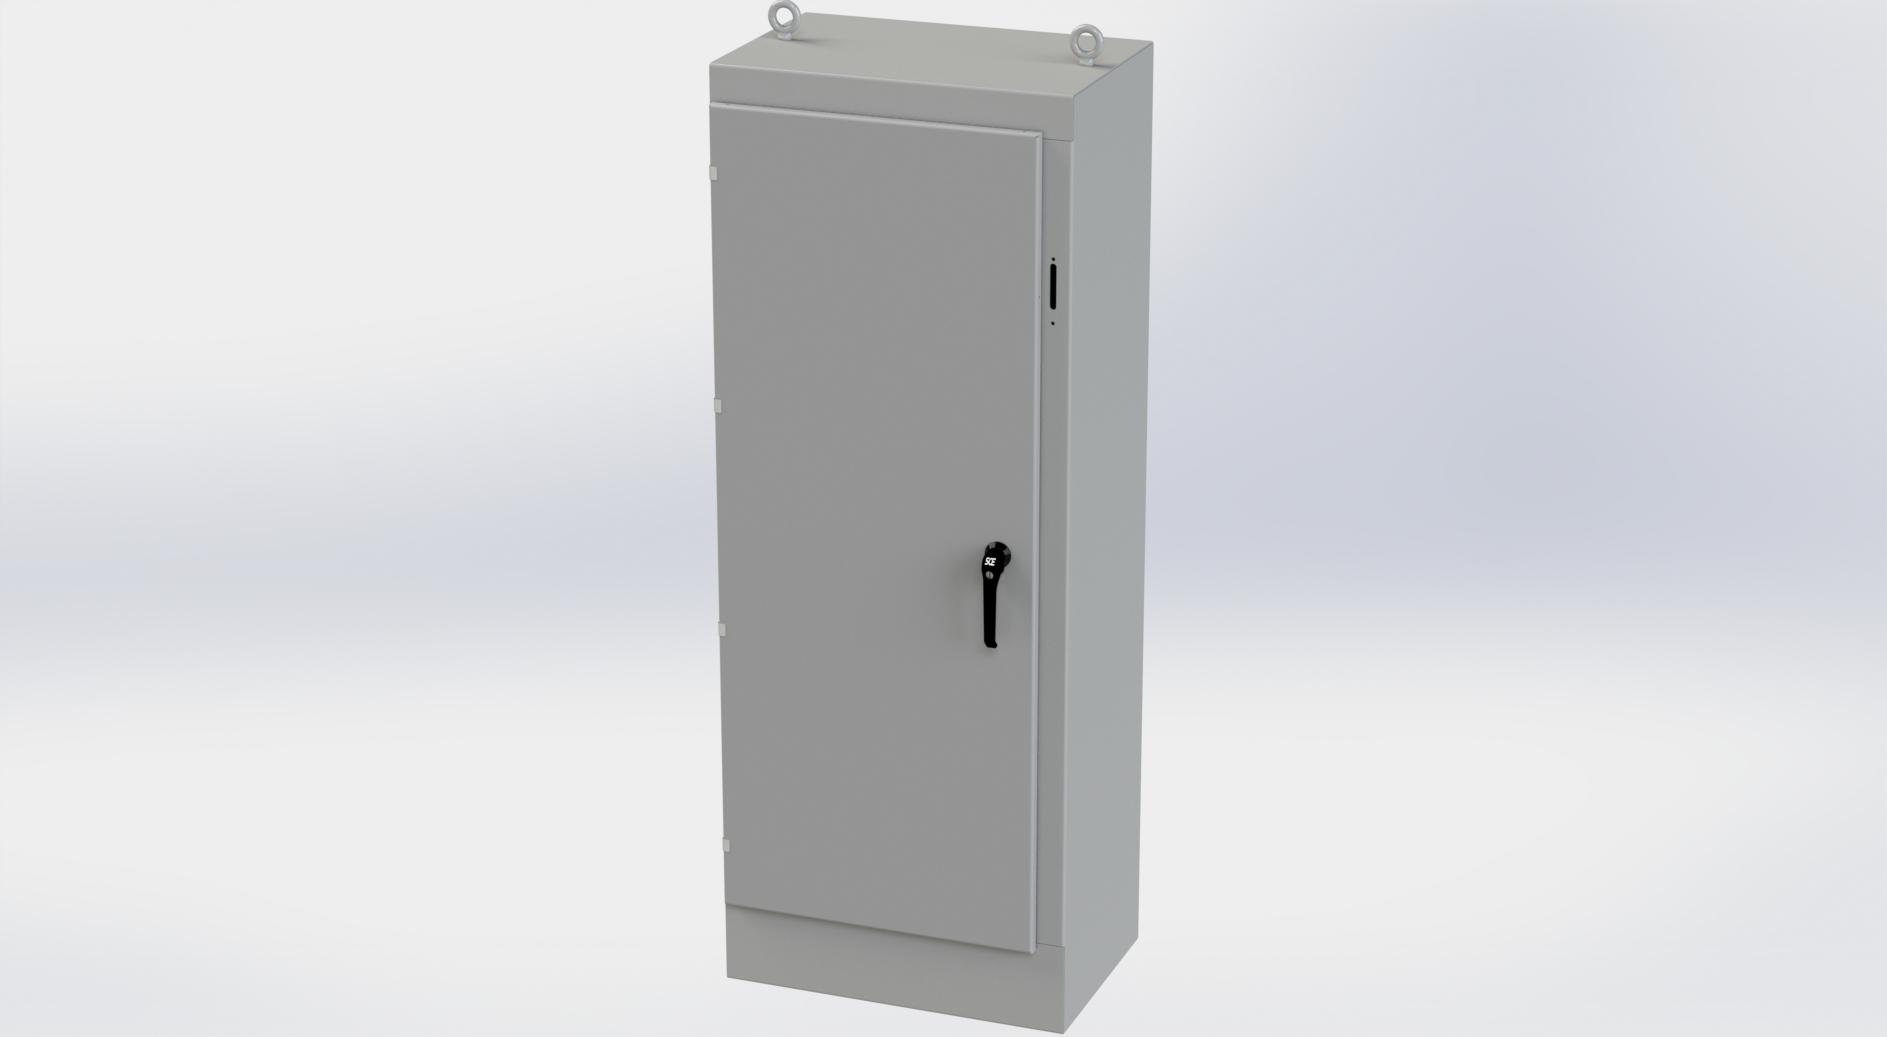 Saginaw Control SCE-72XM2818G 1DR XM Enclosure, Height:72.00", Width:27.50", Depth:18.00", ANSI-61 gray powder coating inside and out. Sub-panels are powder coated white.  